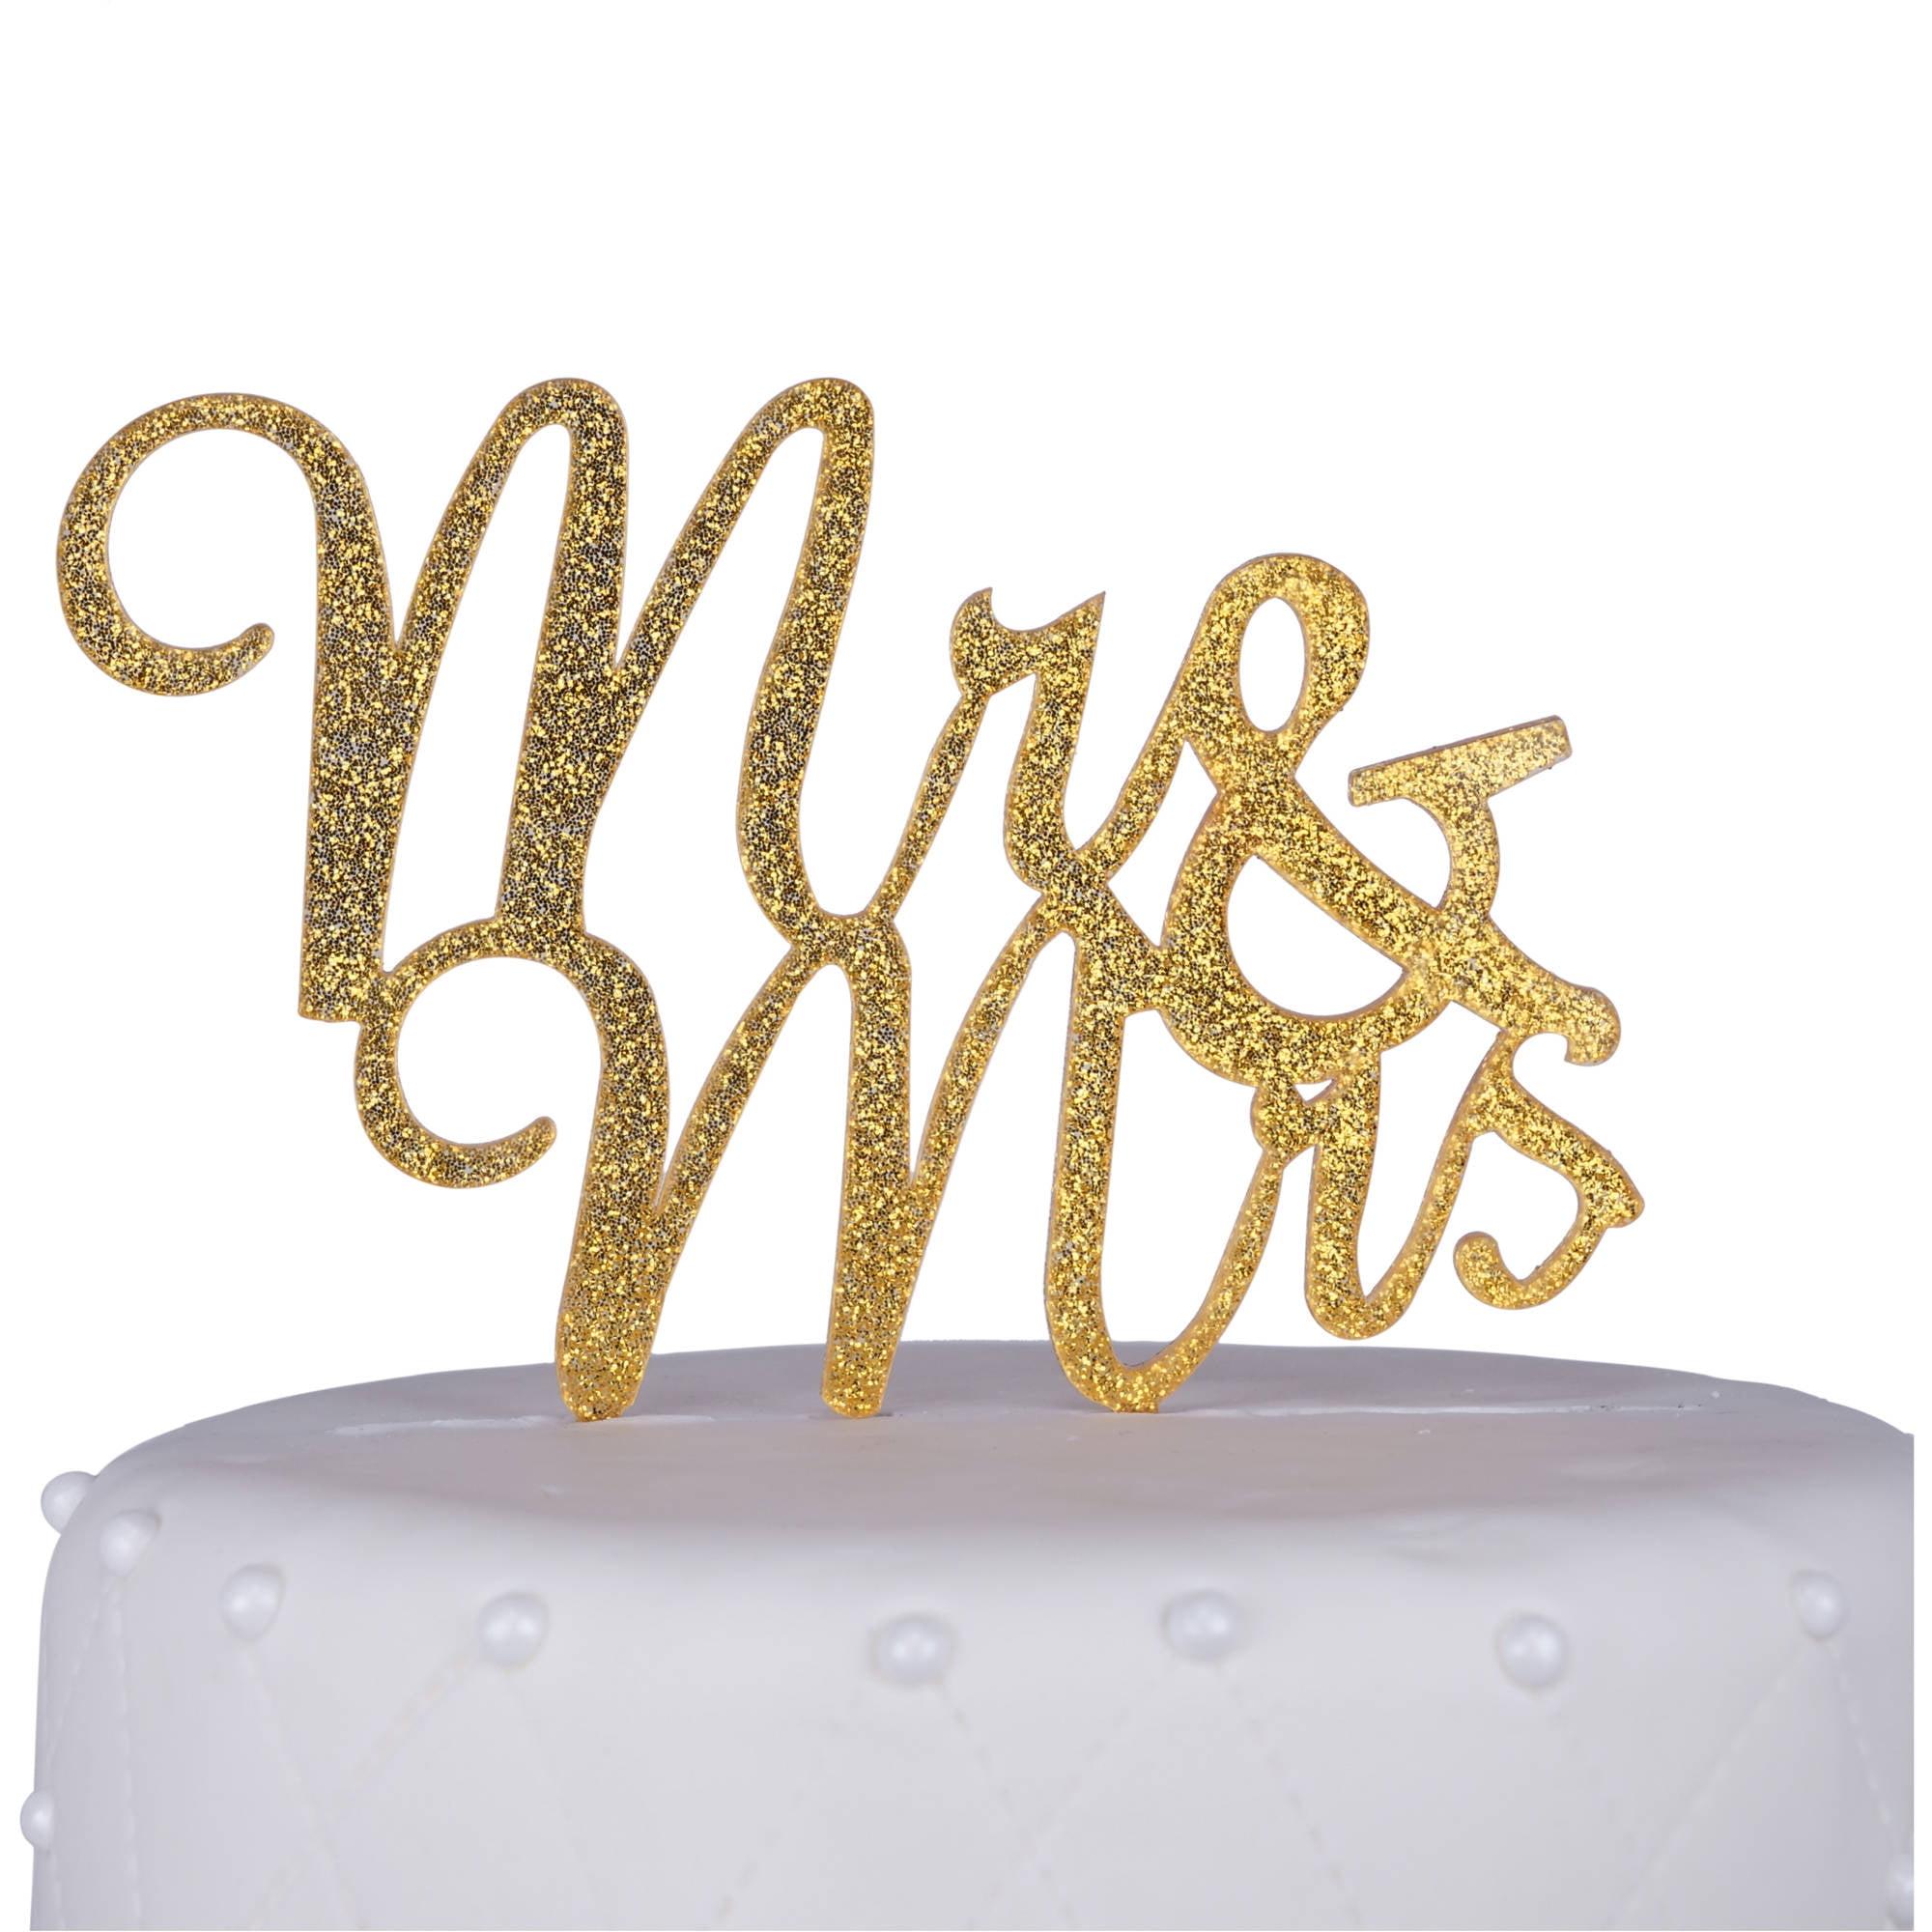 Acrylic Mr And Mrs Wedding Cake Topper Stick Decoration Rustic Anniversary Party